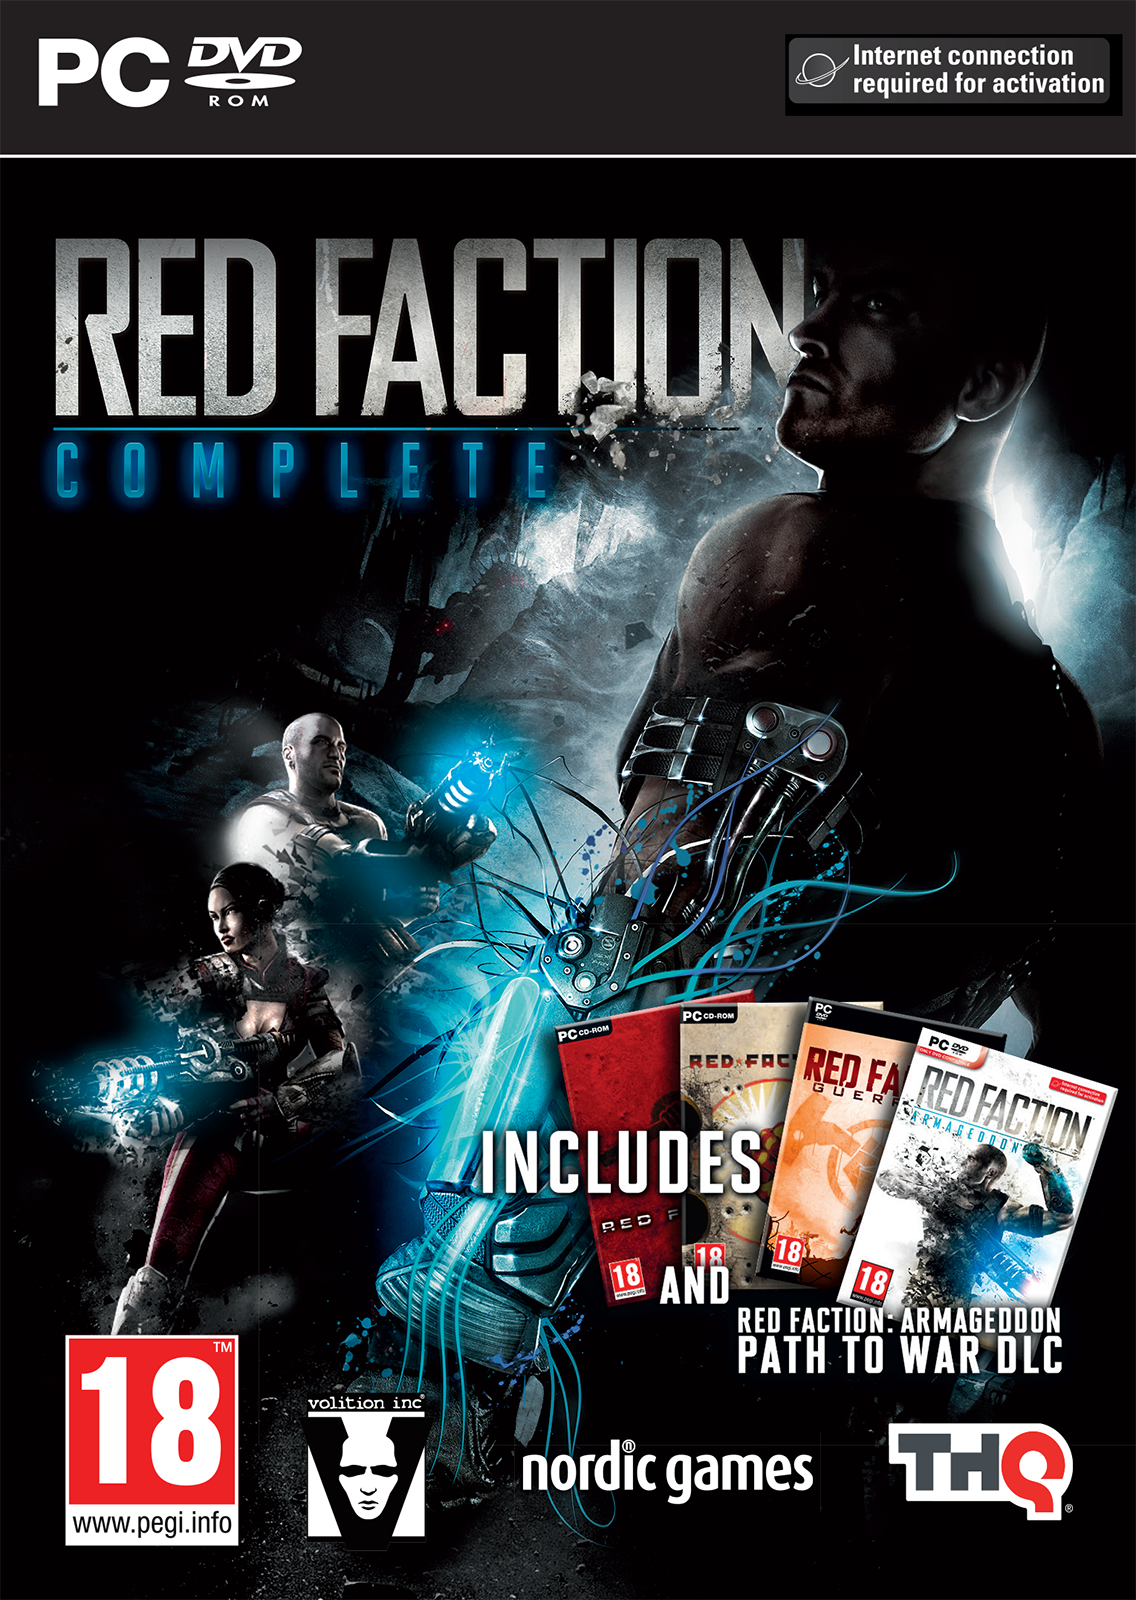 Red Faction Complete Collection